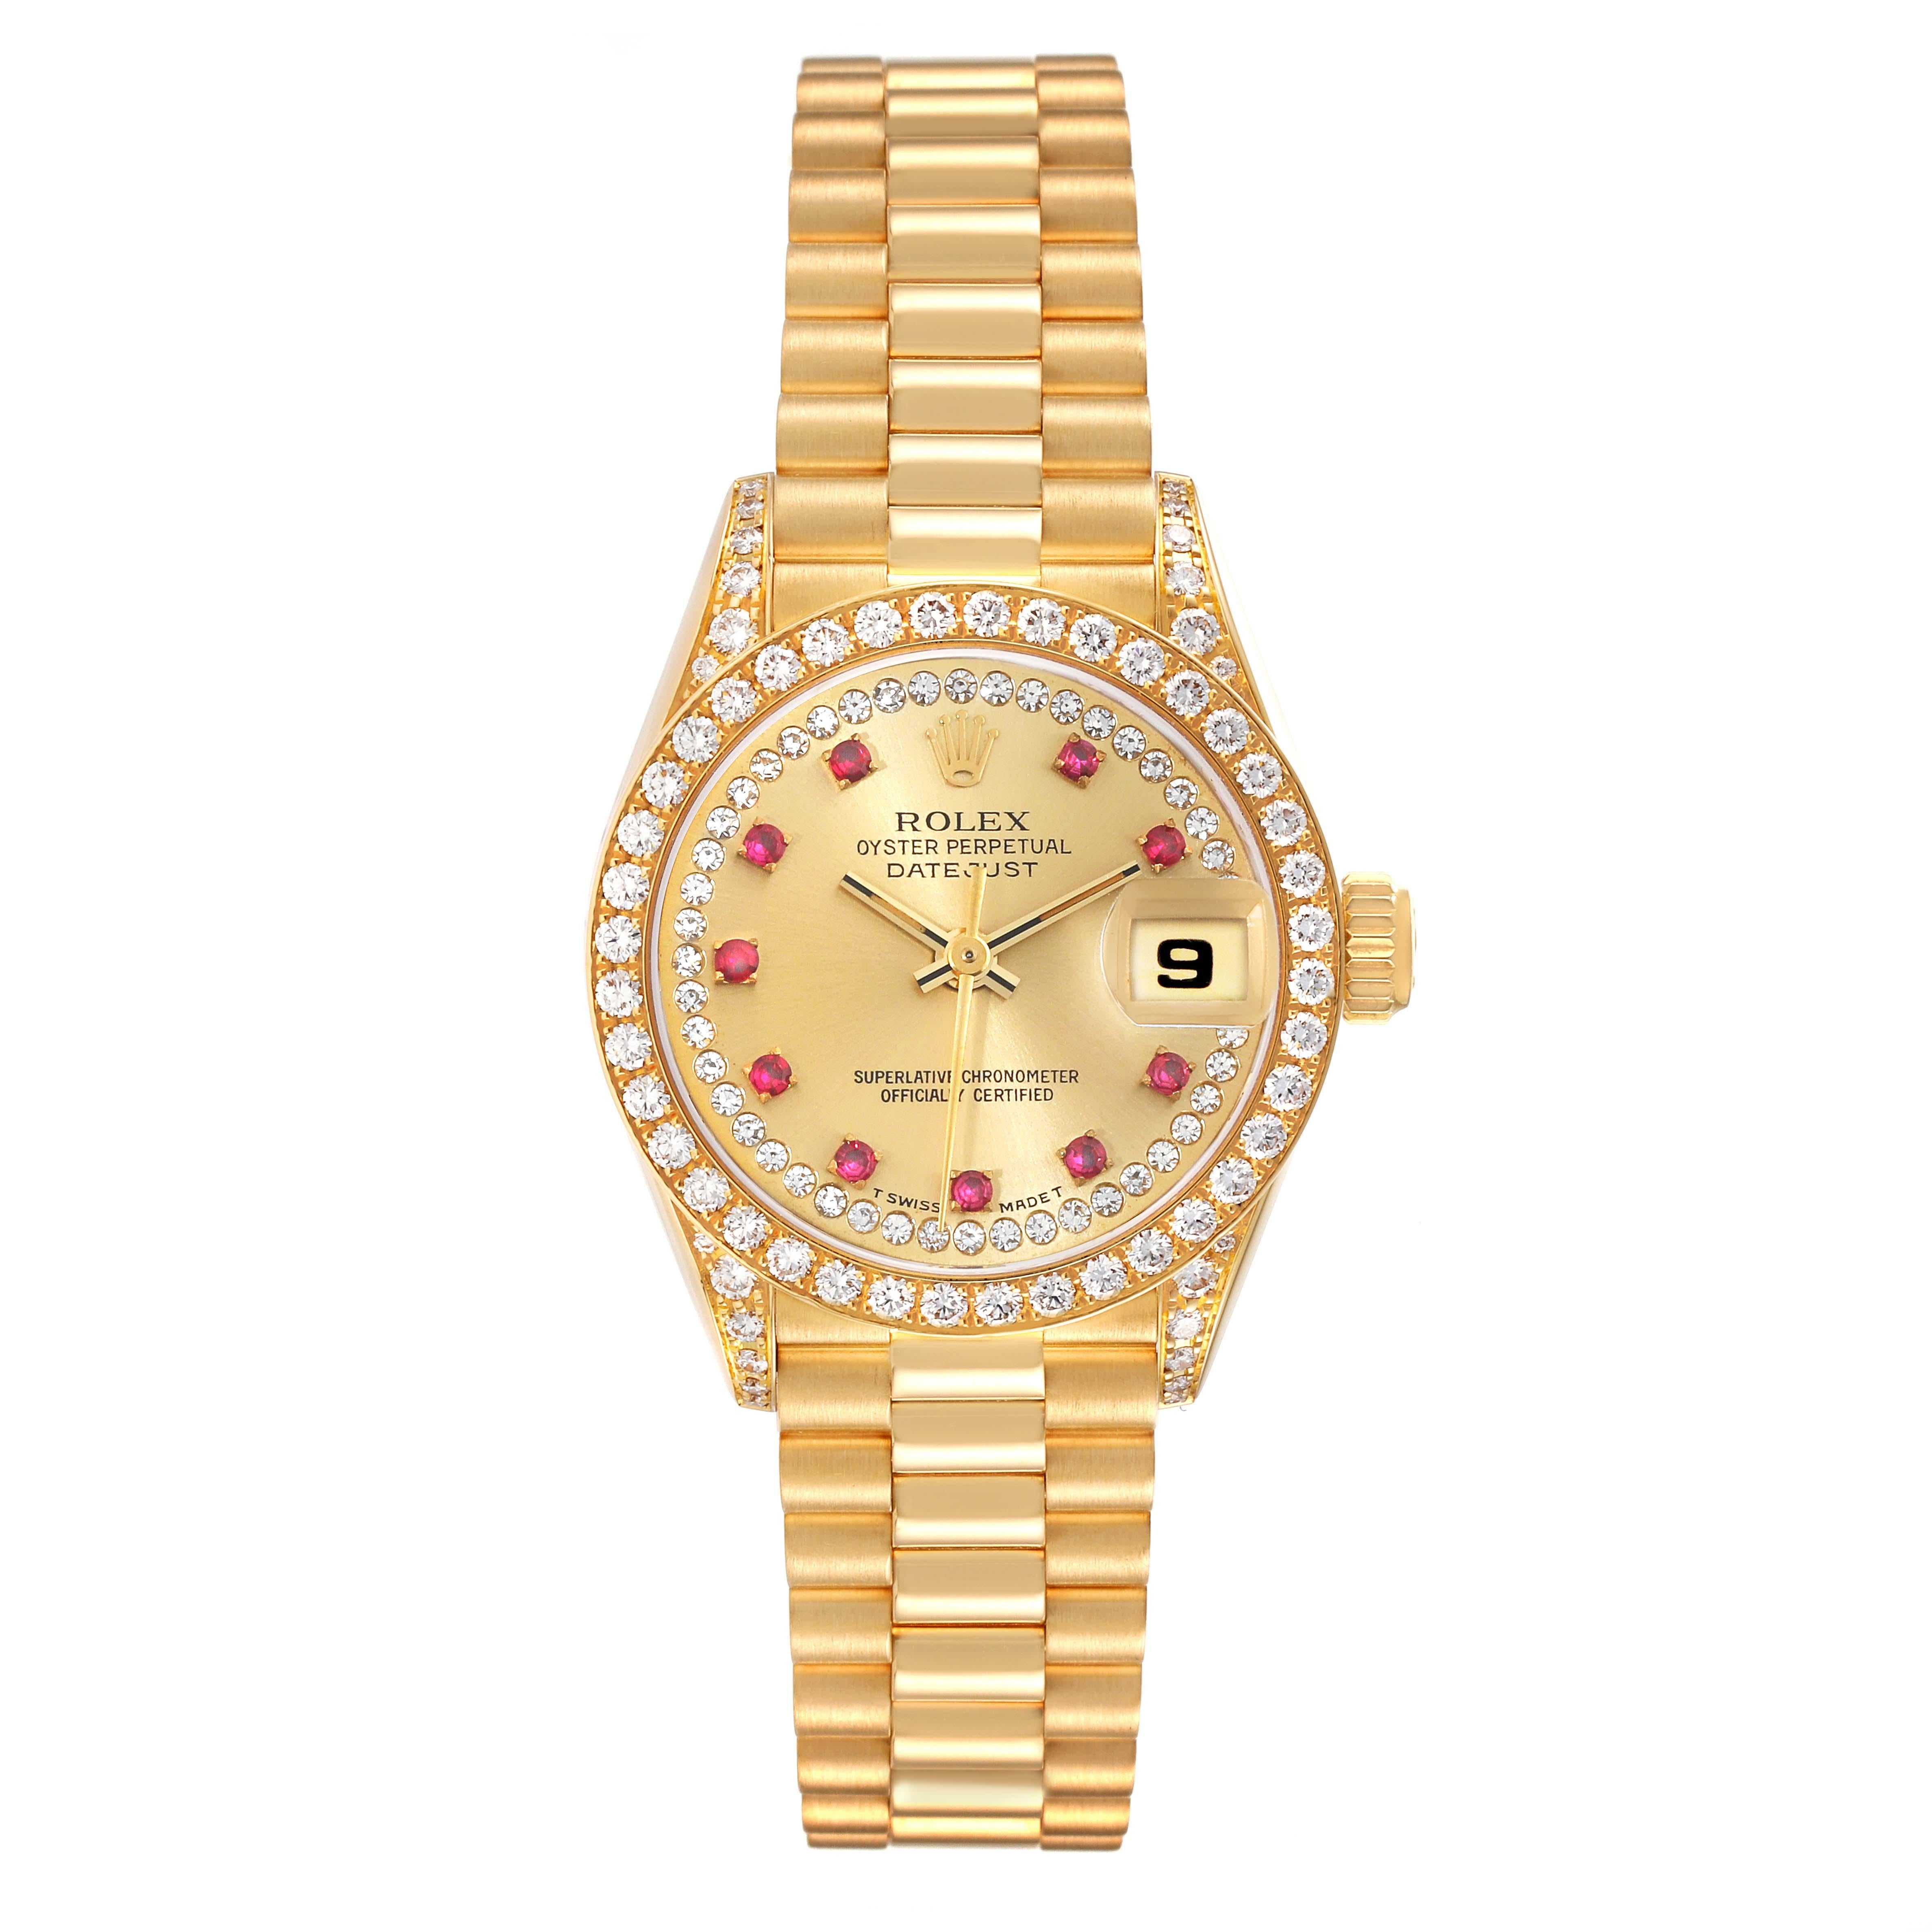 Rolex President Yellow Gold String Diamond Ruby Dial Ladies Watch 69158. Officially certified chronometer self-winding movement. 18k yellow gold oyster case 26.0 mm in diameter. Rolex logo on a crown. Original Rolex factory diamond lugs. Original